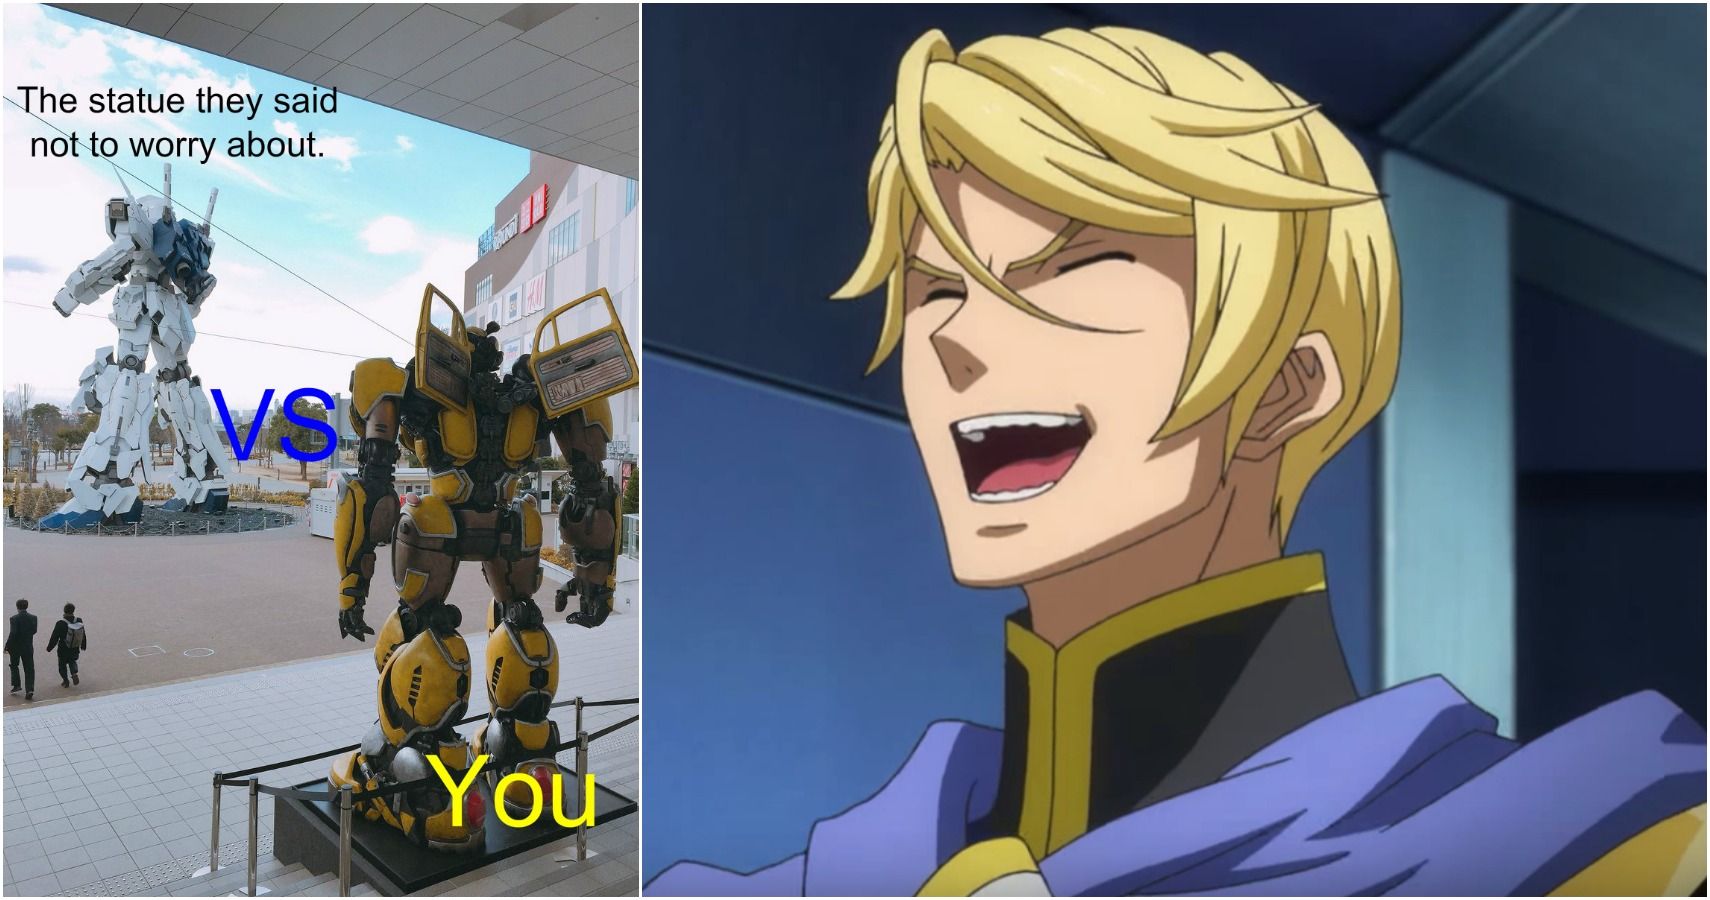 Mobile Suit Gundam 10 Hilarious Memes That Only Real Fans Will Appreciate